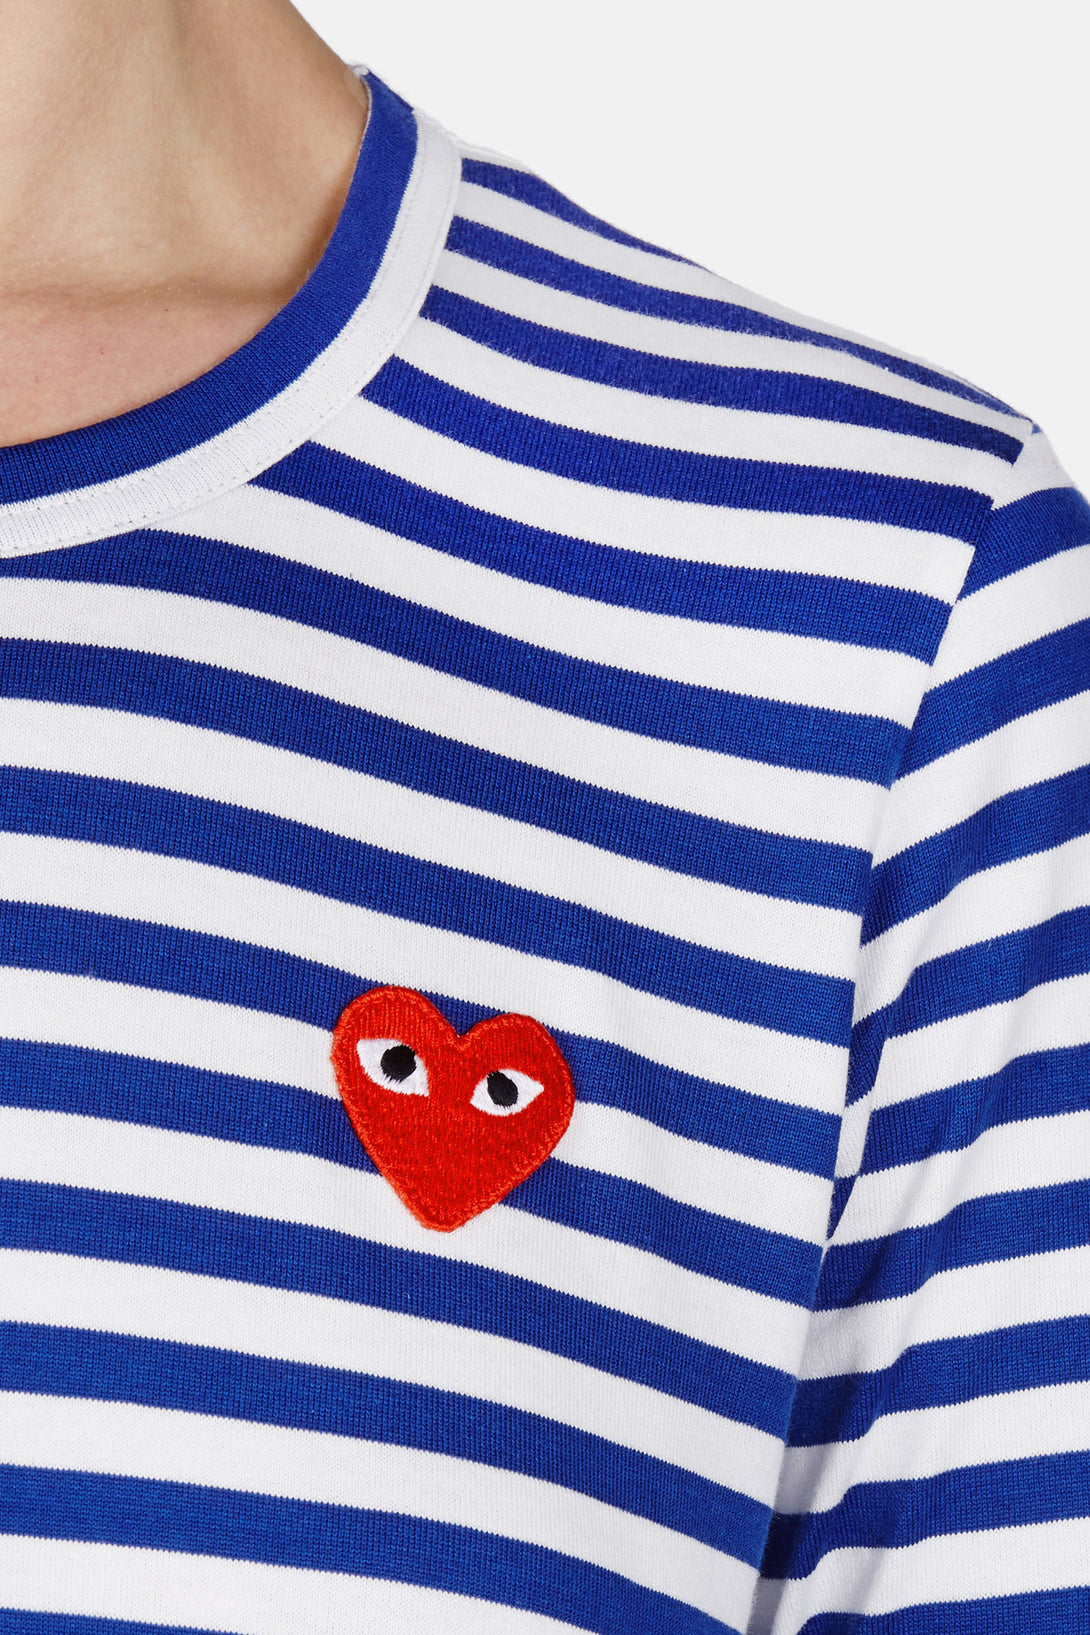 red blue striped t shirt